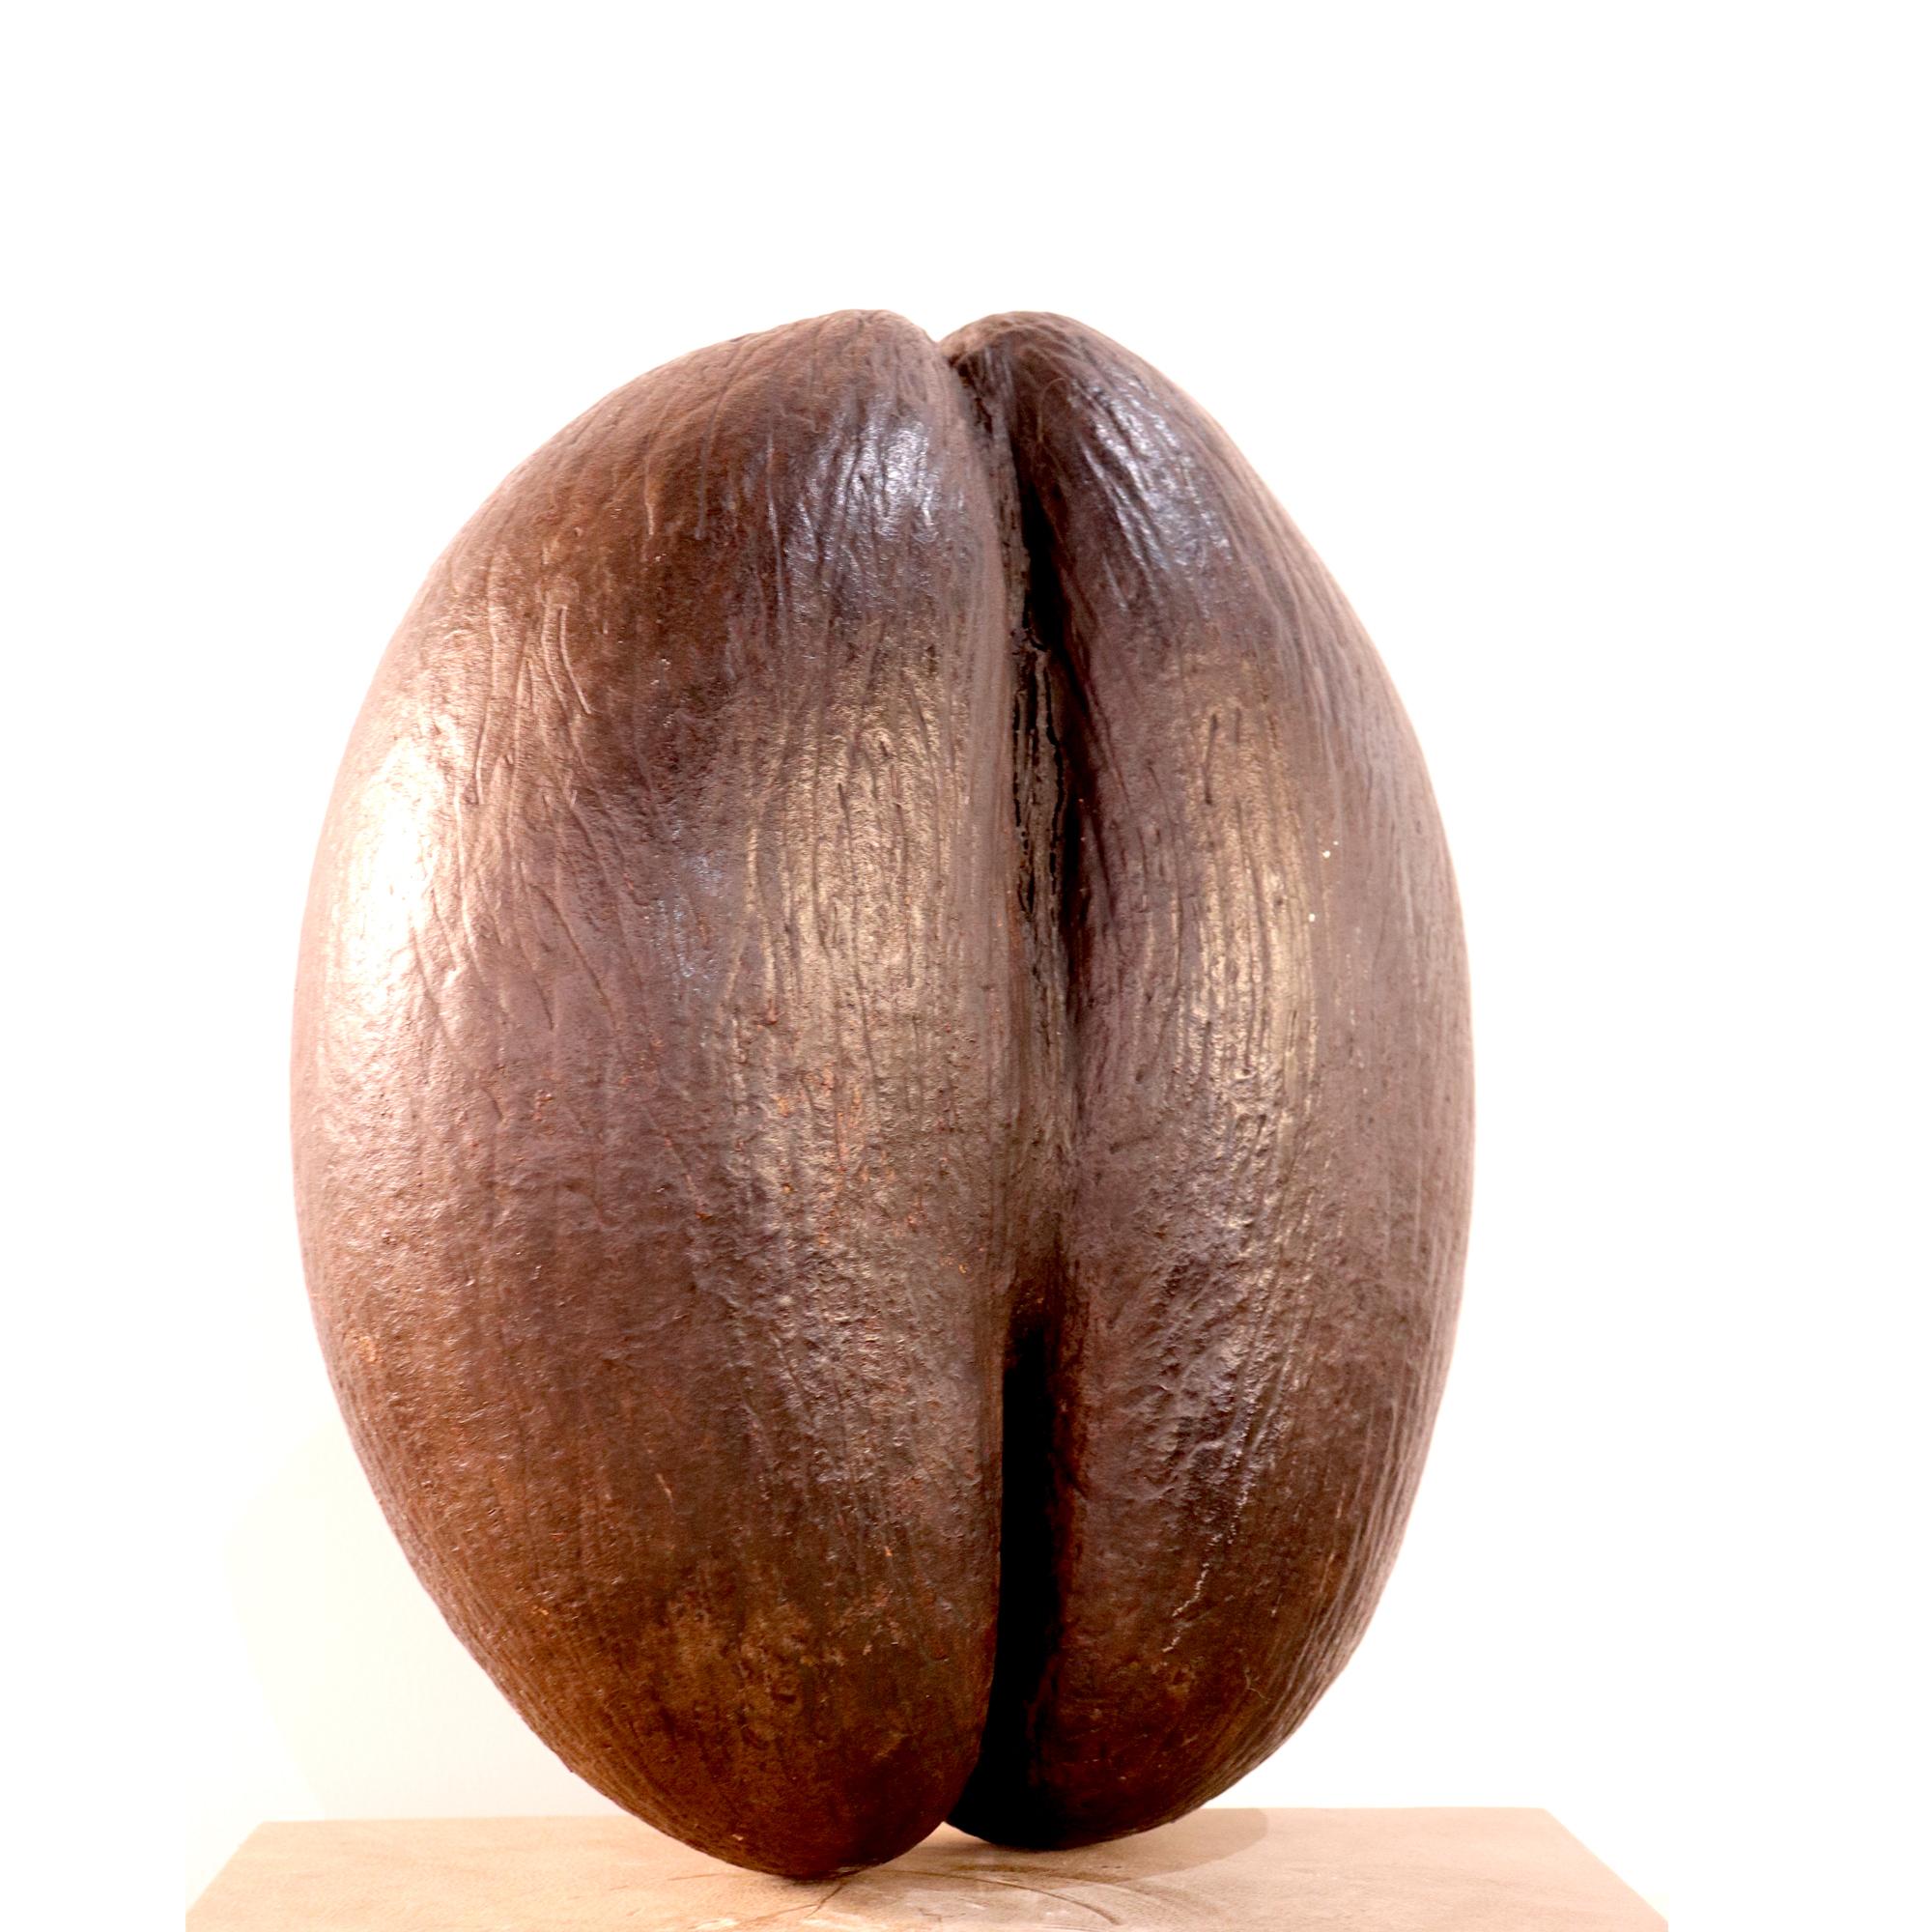 Deemed as ‘the forbidden fruit of Seychelles; this rare large sculpture is made of patinated coconut. It depicts a nut with suggestive features. Great for a quirky home edition. It is a rare and beautiful collectors item.